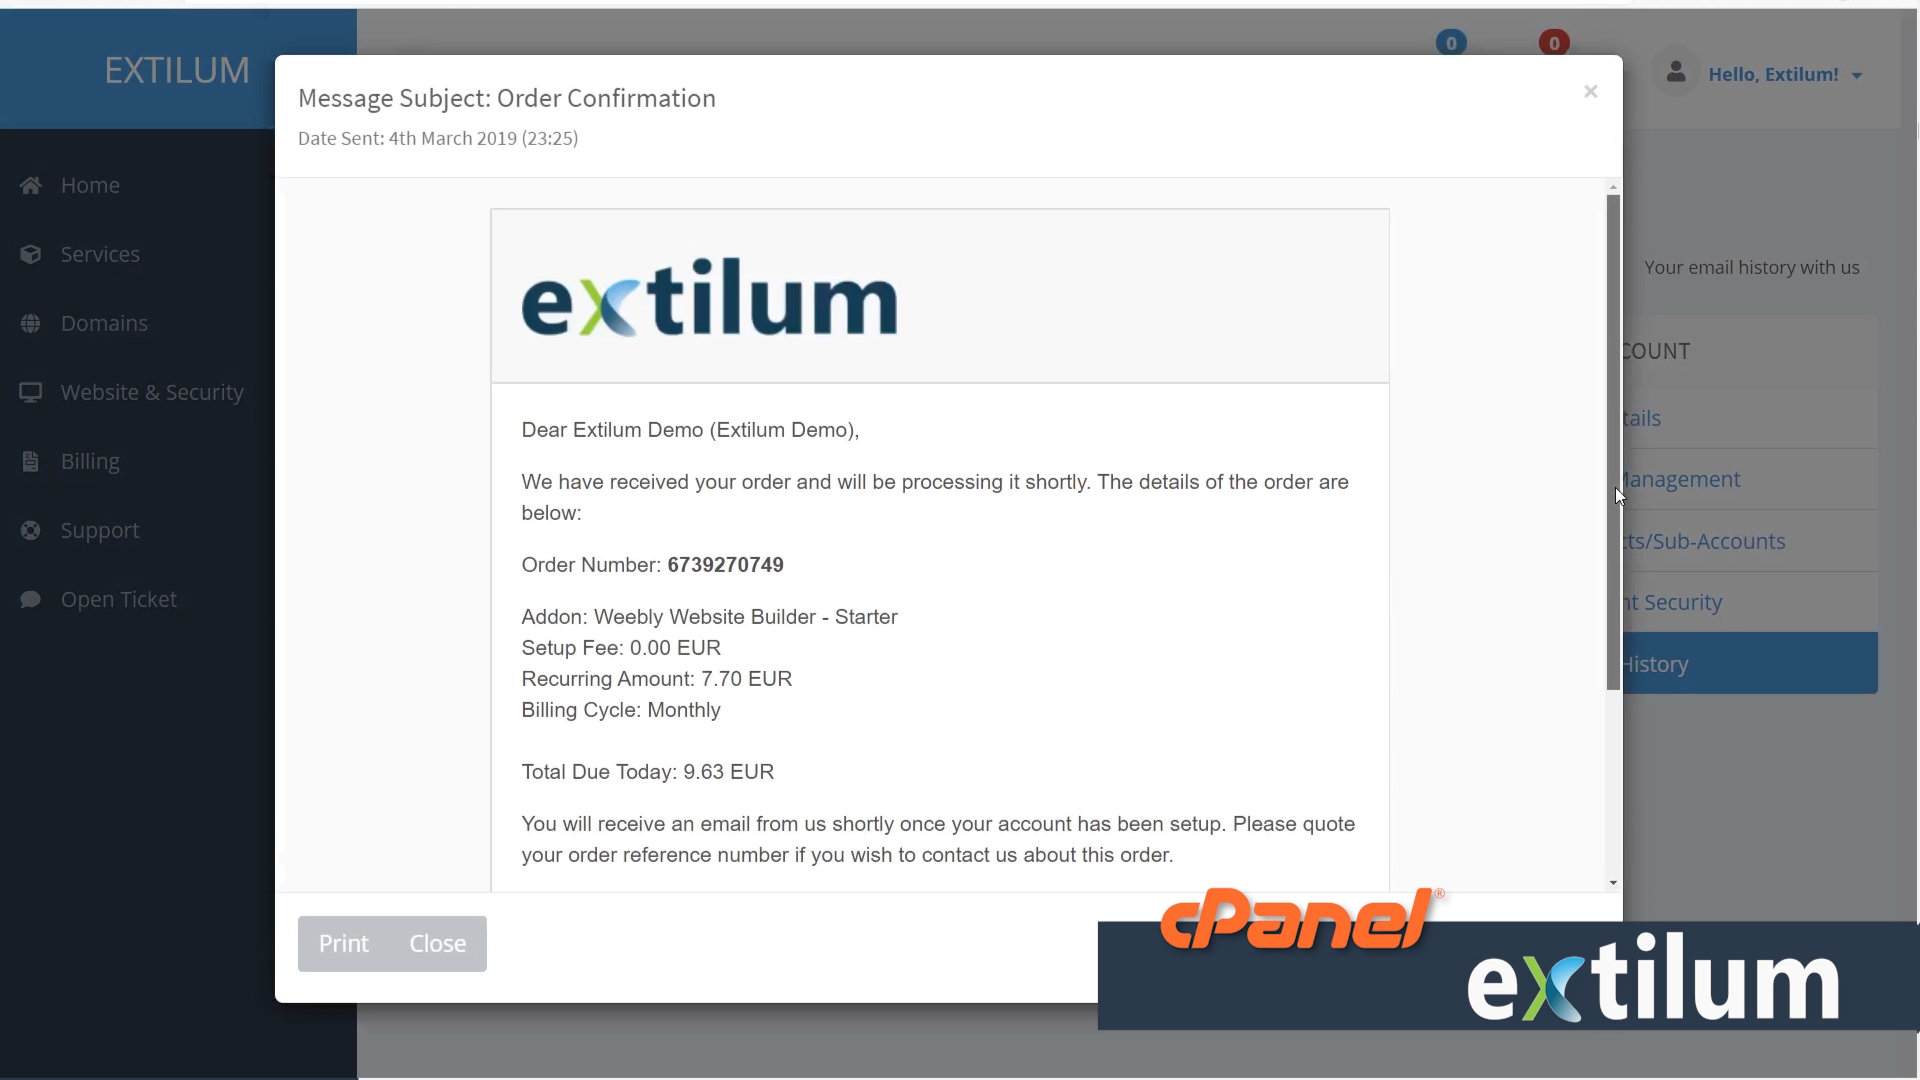 Extilum cPanel - View Email History